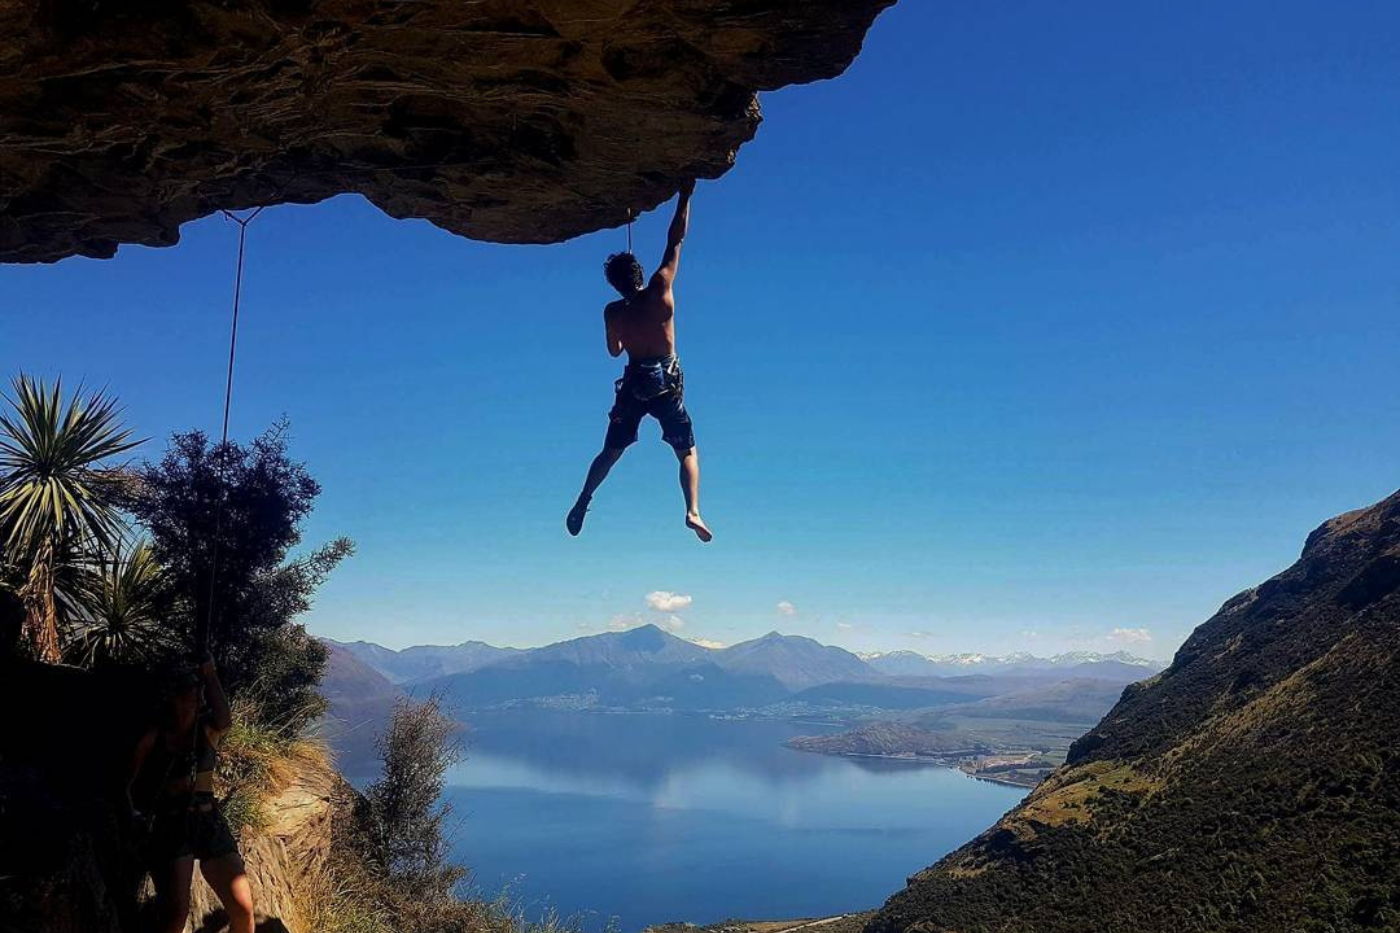 Rockclimber hanging off rock above lake and mountains